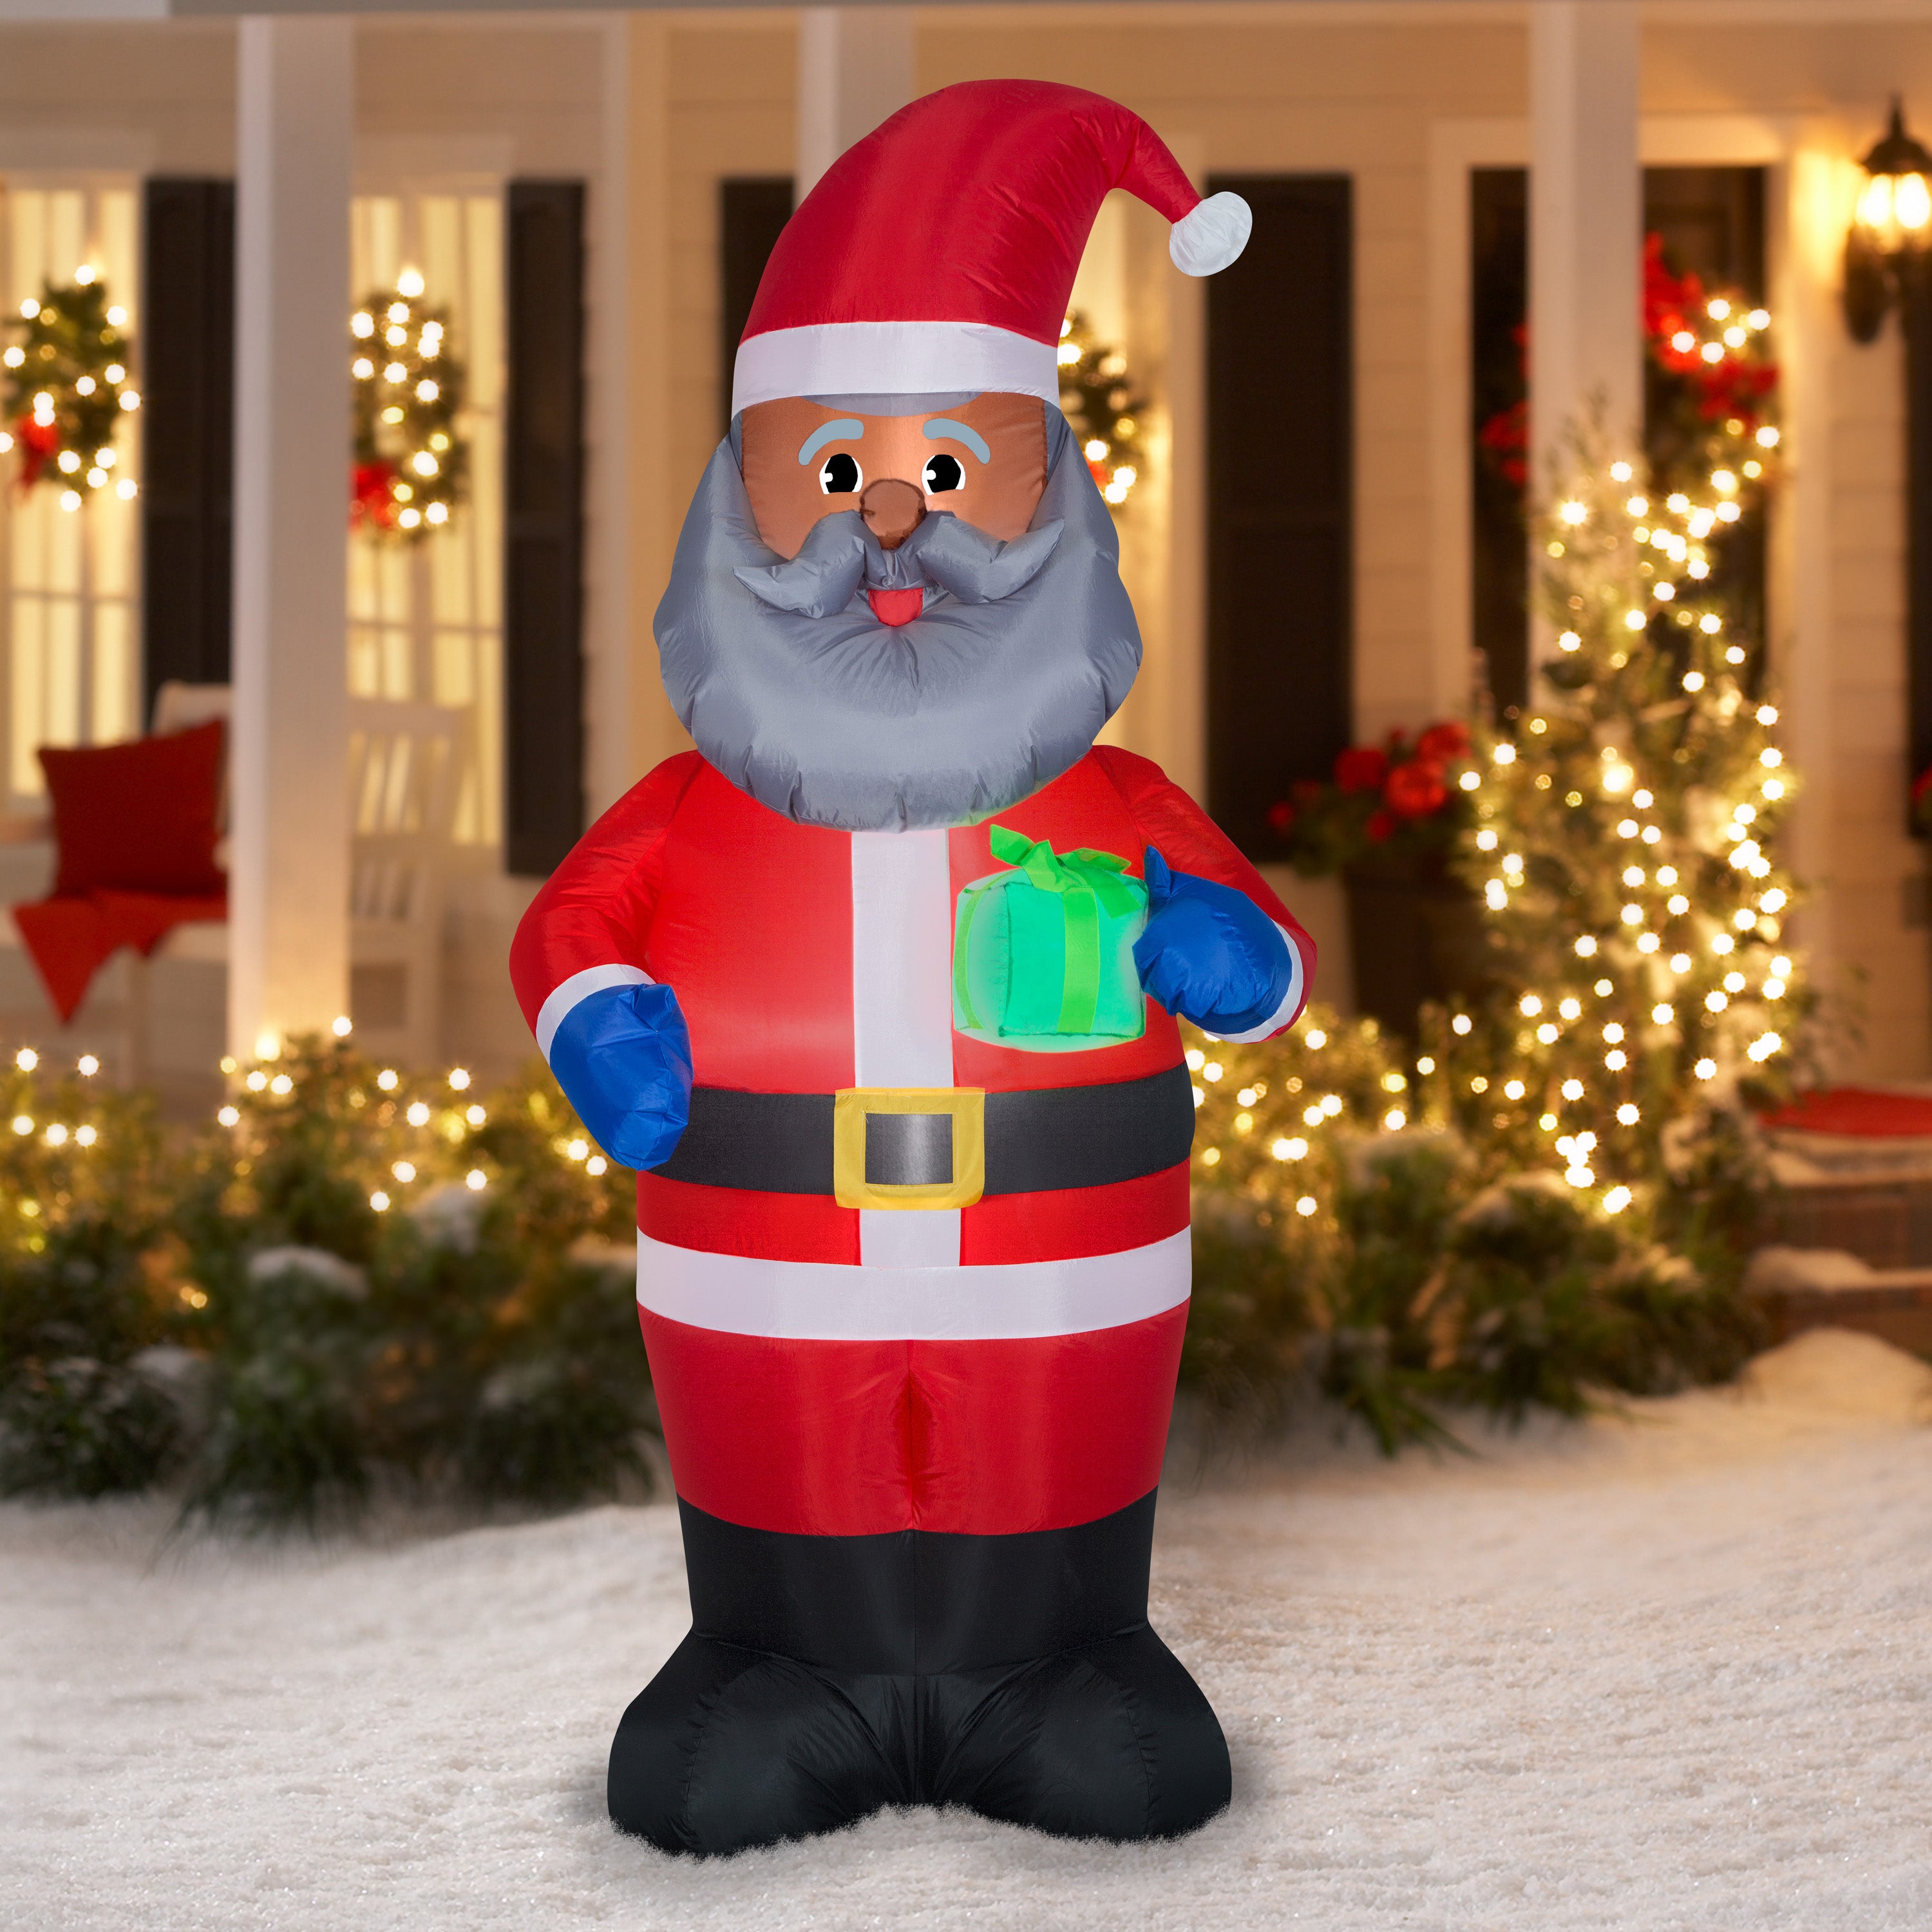 Gemmy Christmas Airblown Inflatable African American Santa OPP, 7 ft Tall, Red